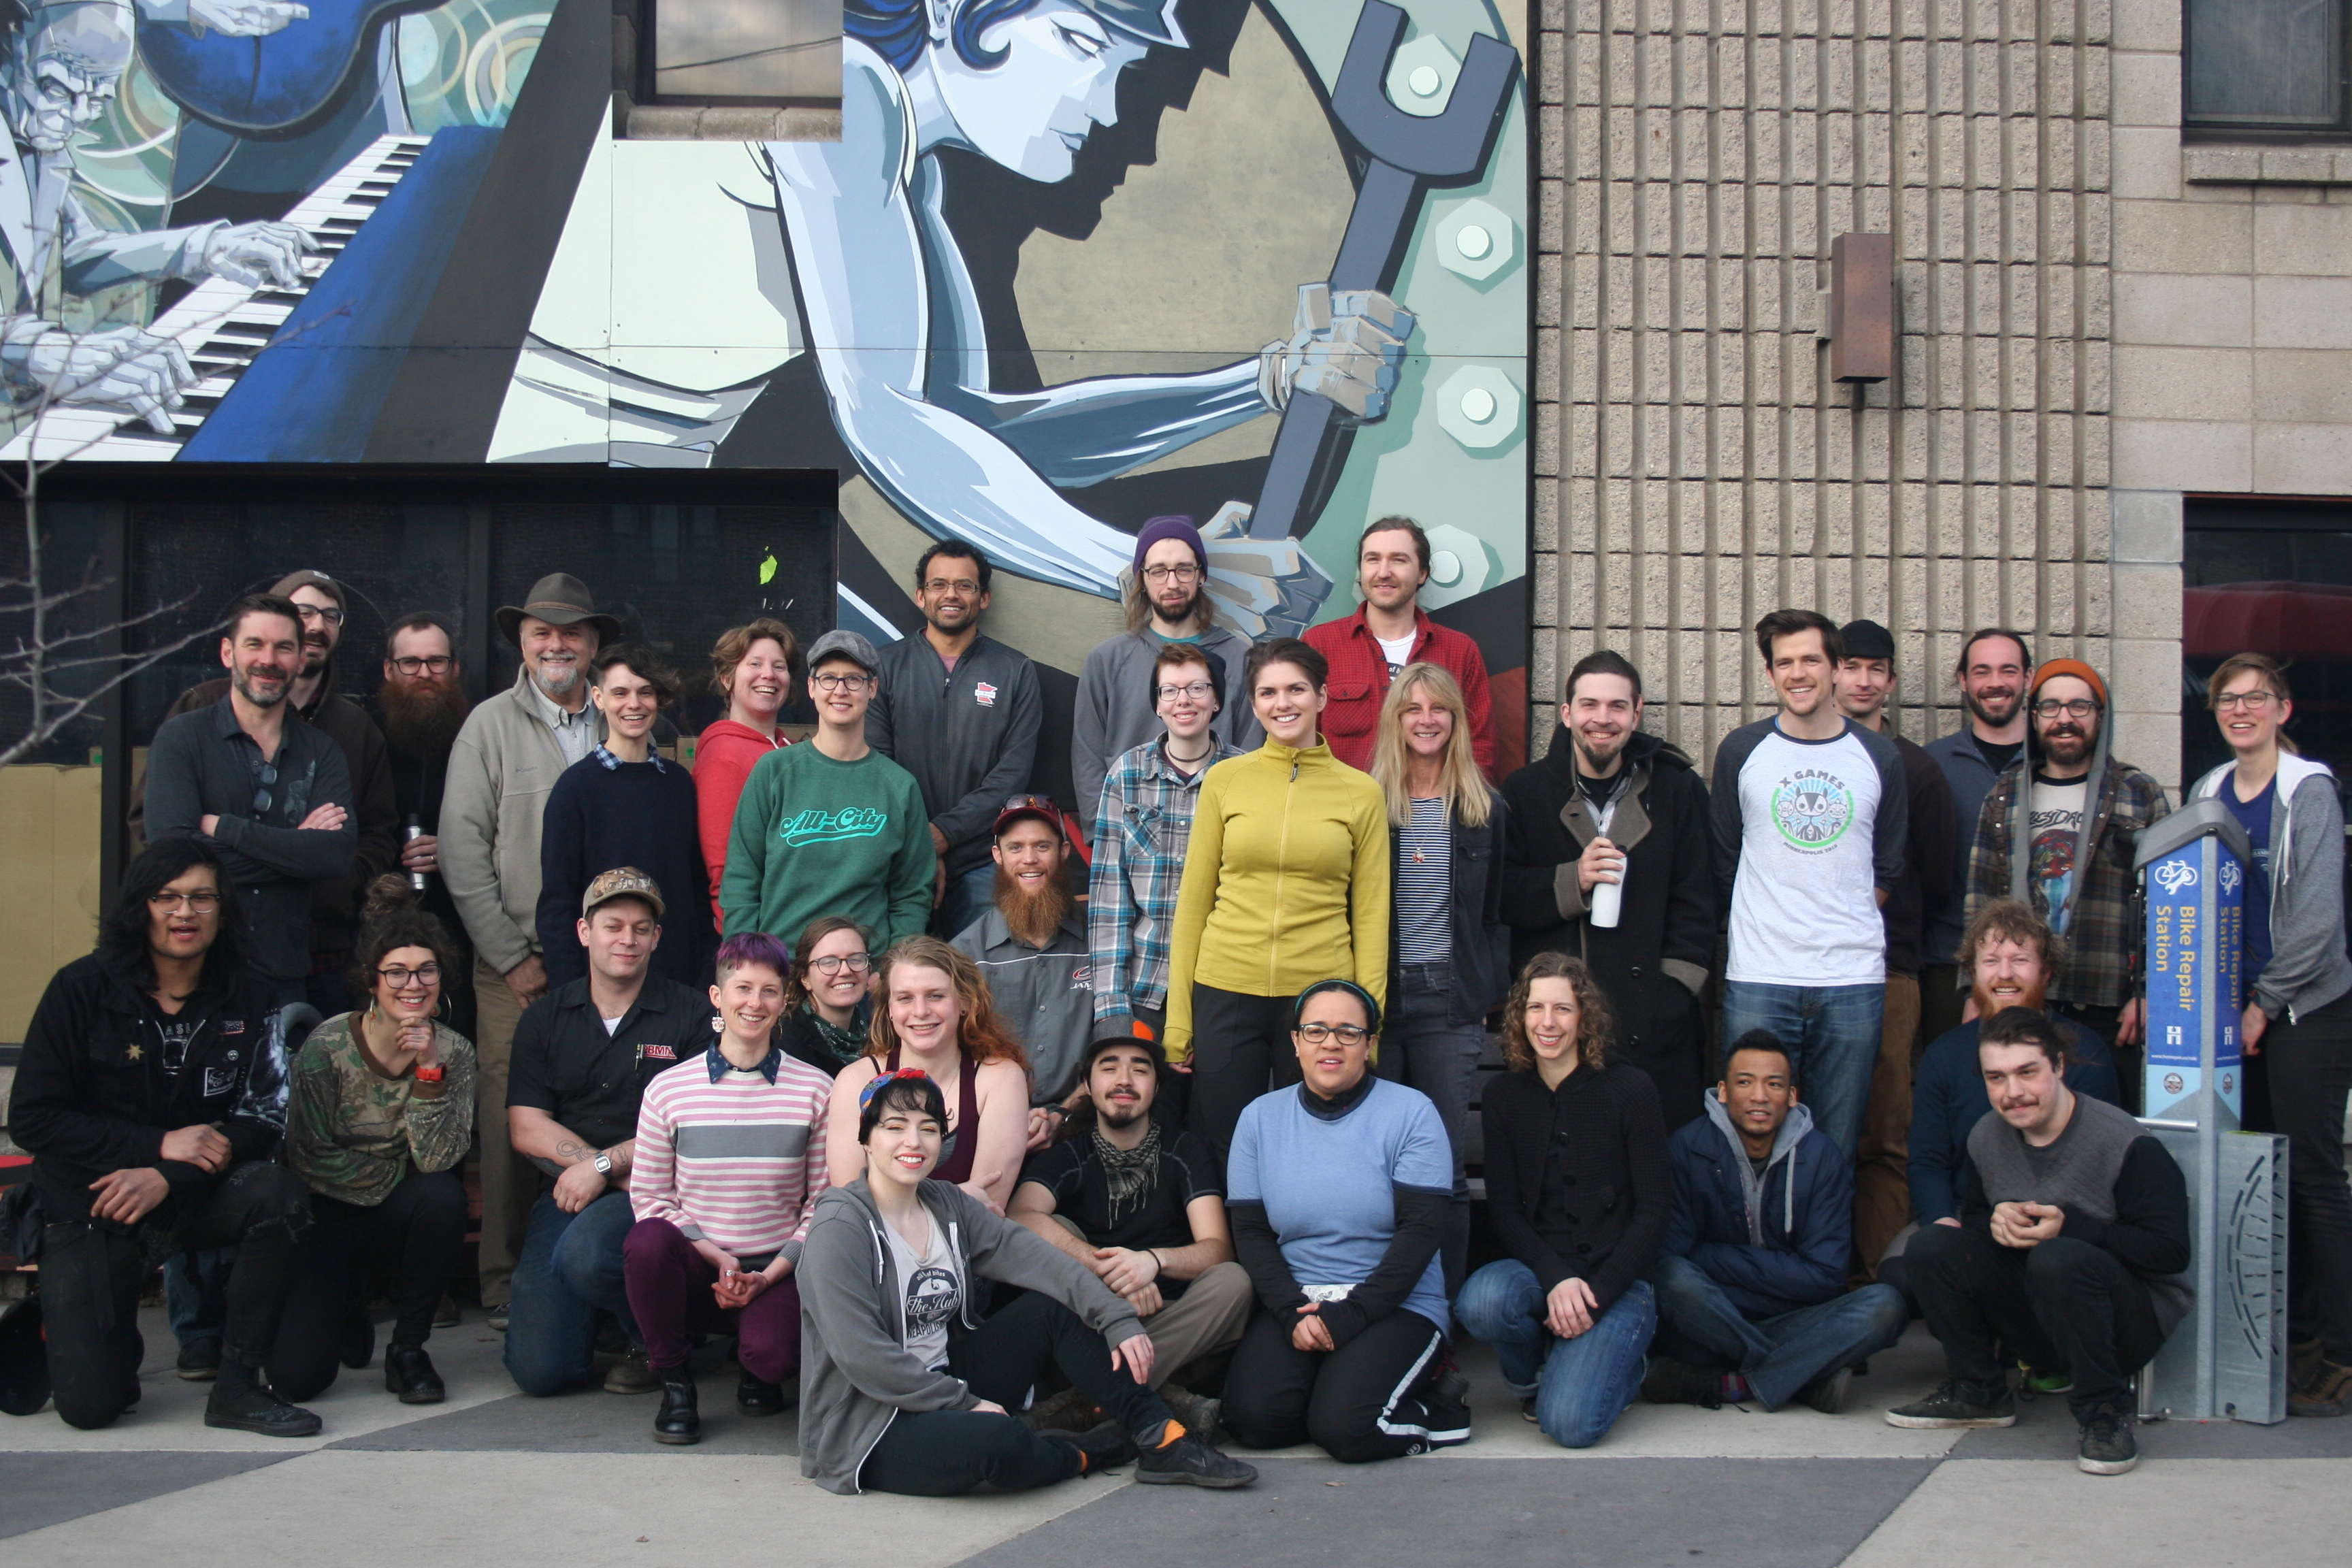 2019 Hub staff photo: group of people against Longfellow shop location with mural facade and concrete brick wall behind